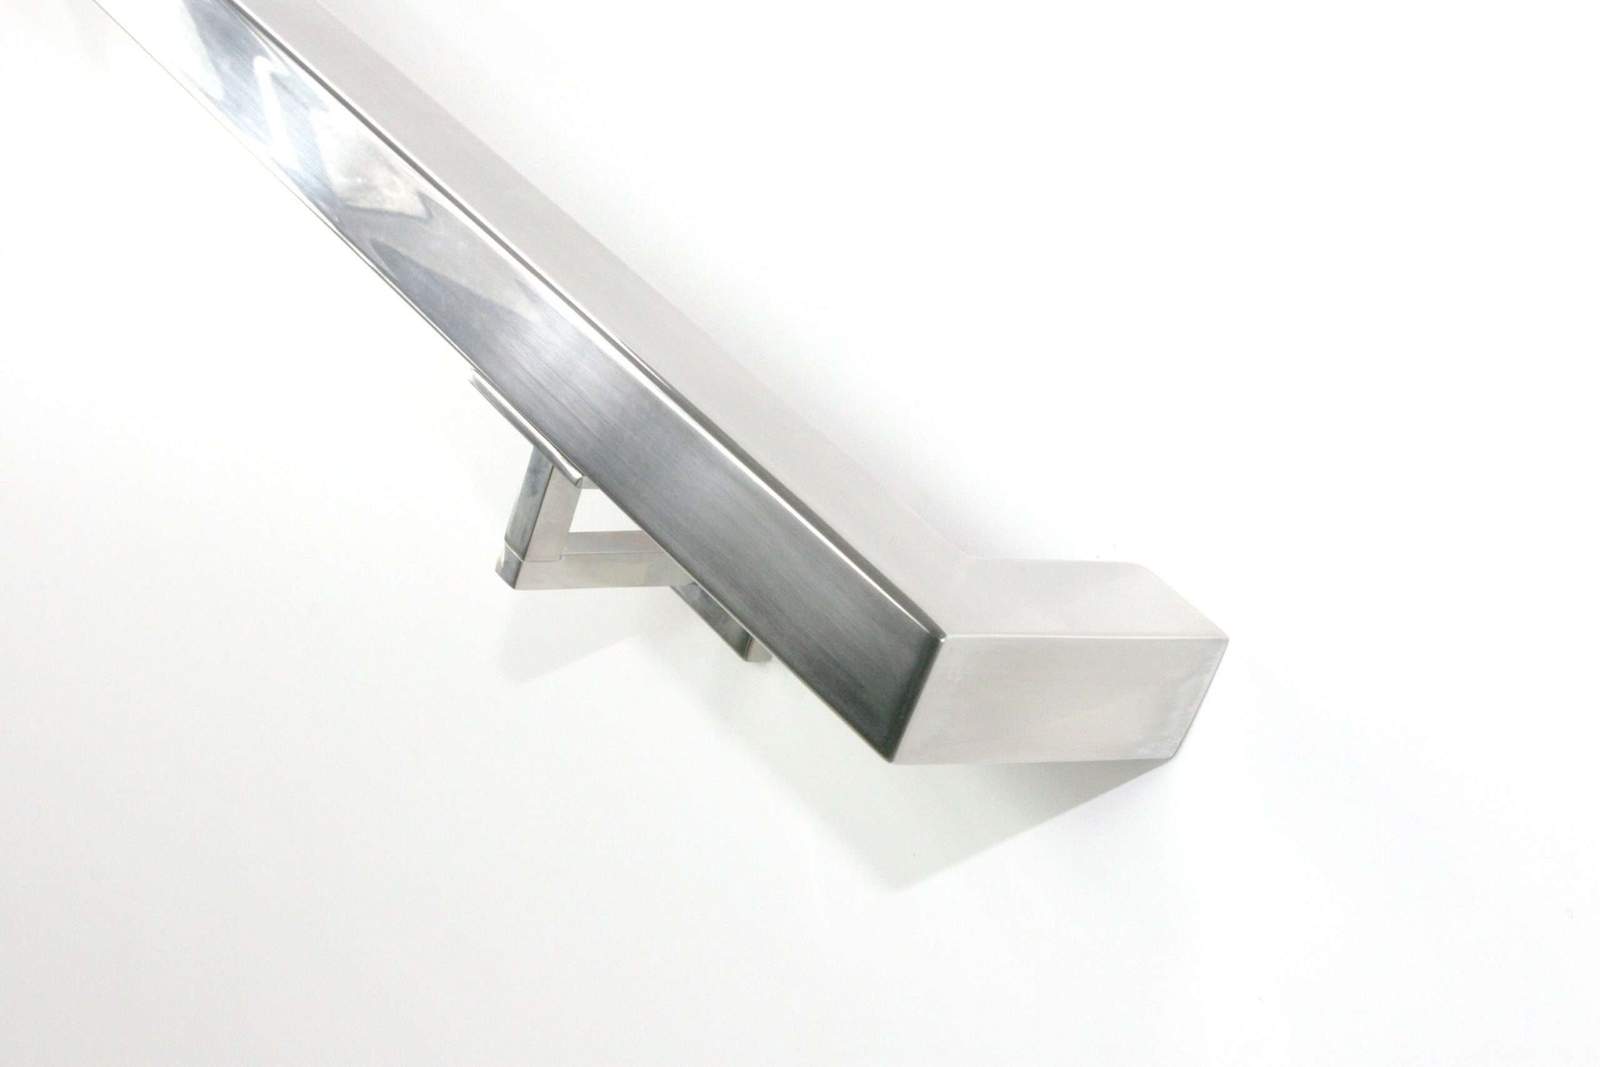 Stainless steel chrome mirror square ADA handrail – 96” in = 8’ ft